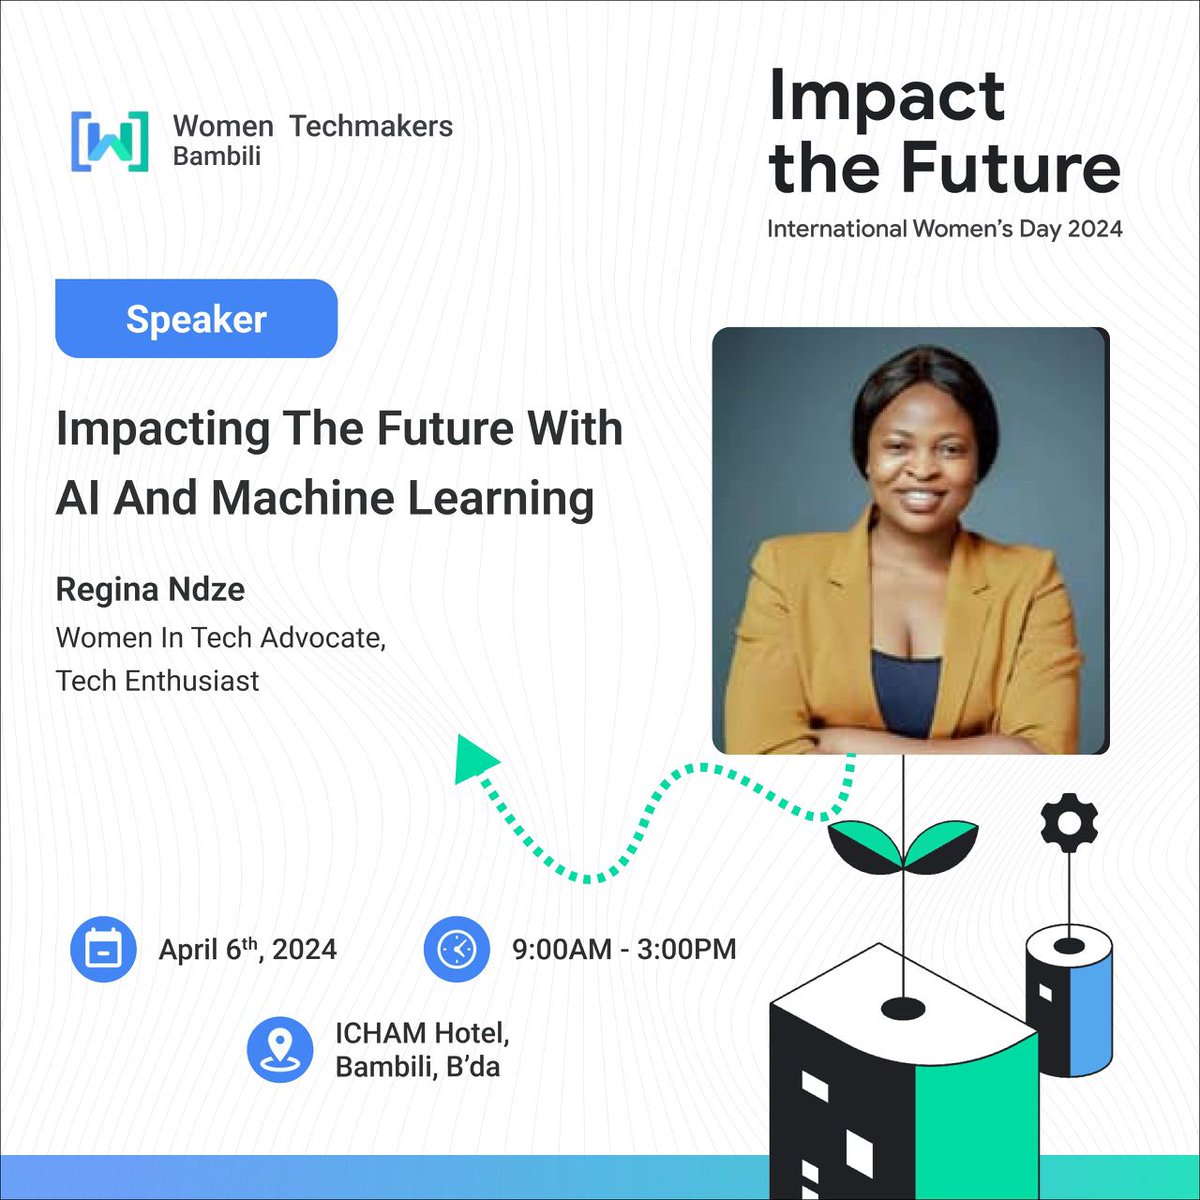 🥁🥁🥳 Drum roll! 🥁🥁🥳 📢 Introducing our first speaker, Ndze Regina Kukiwin❤️ She'll be giving a talk on 'IMPACTING THE FUTURE WITH AI AND MACHINE LEARNING'. 💻 Ready to hear from her? 😊 Tap Tap the link below: gdg.community.dev/e/m422y4/ Date : 6th April 2024. #IWD2024